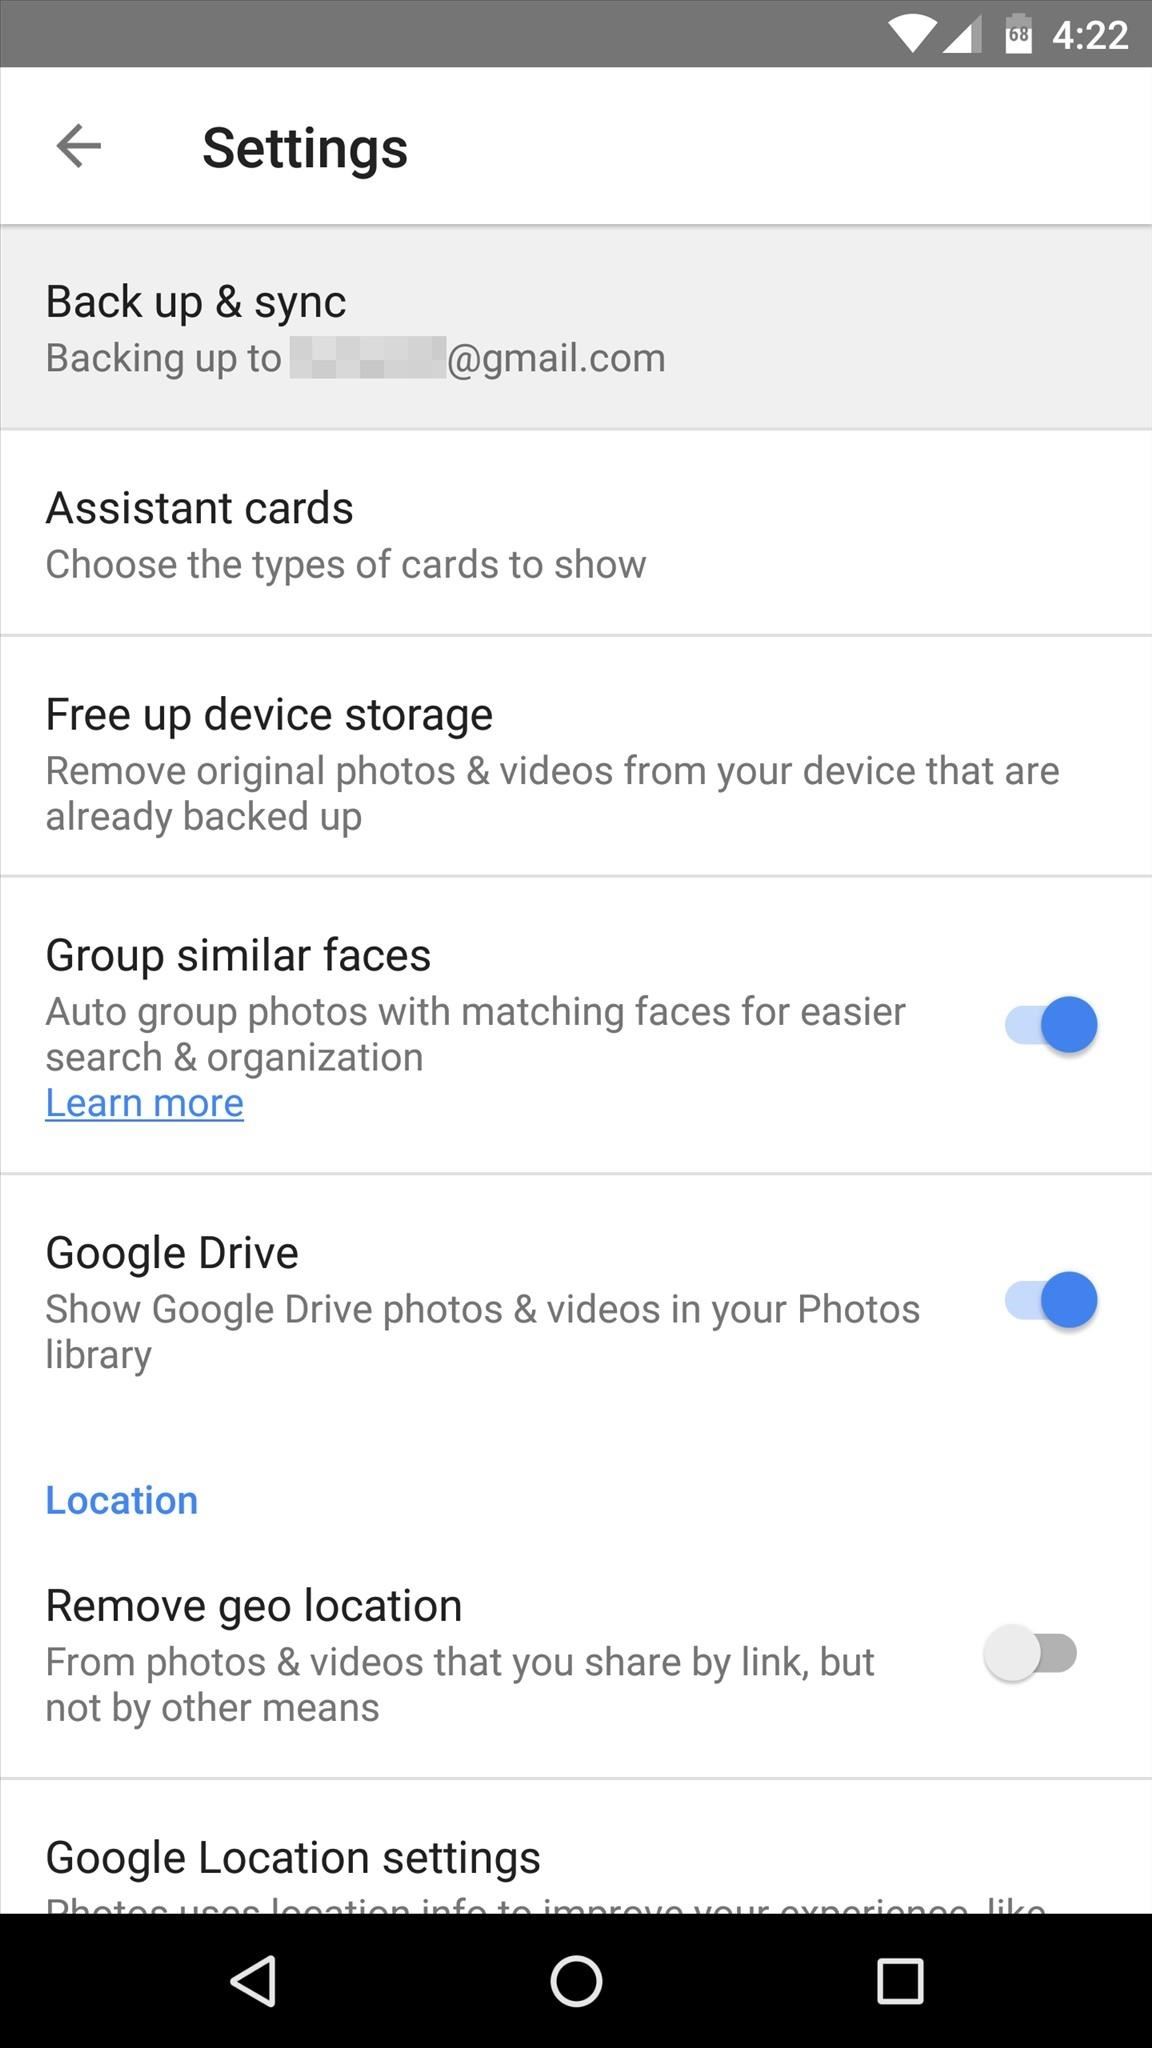 Google Photos' Killer Features Make It a Must-Have on Android